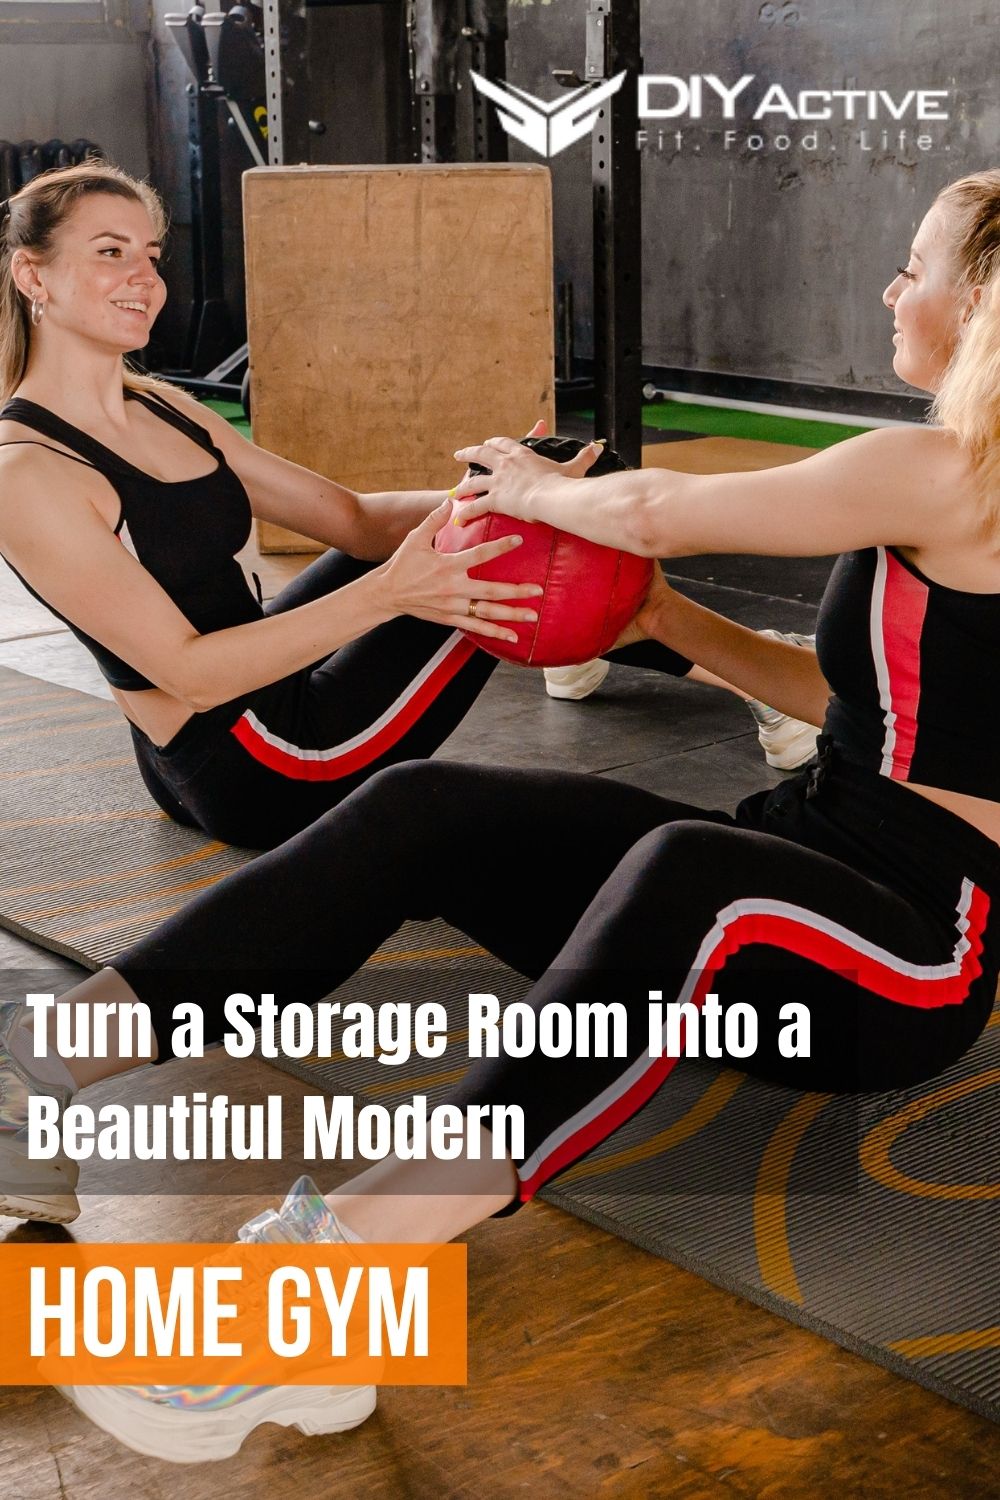 How to Turn a Storage Room into a Beautiful Modern Home Gym